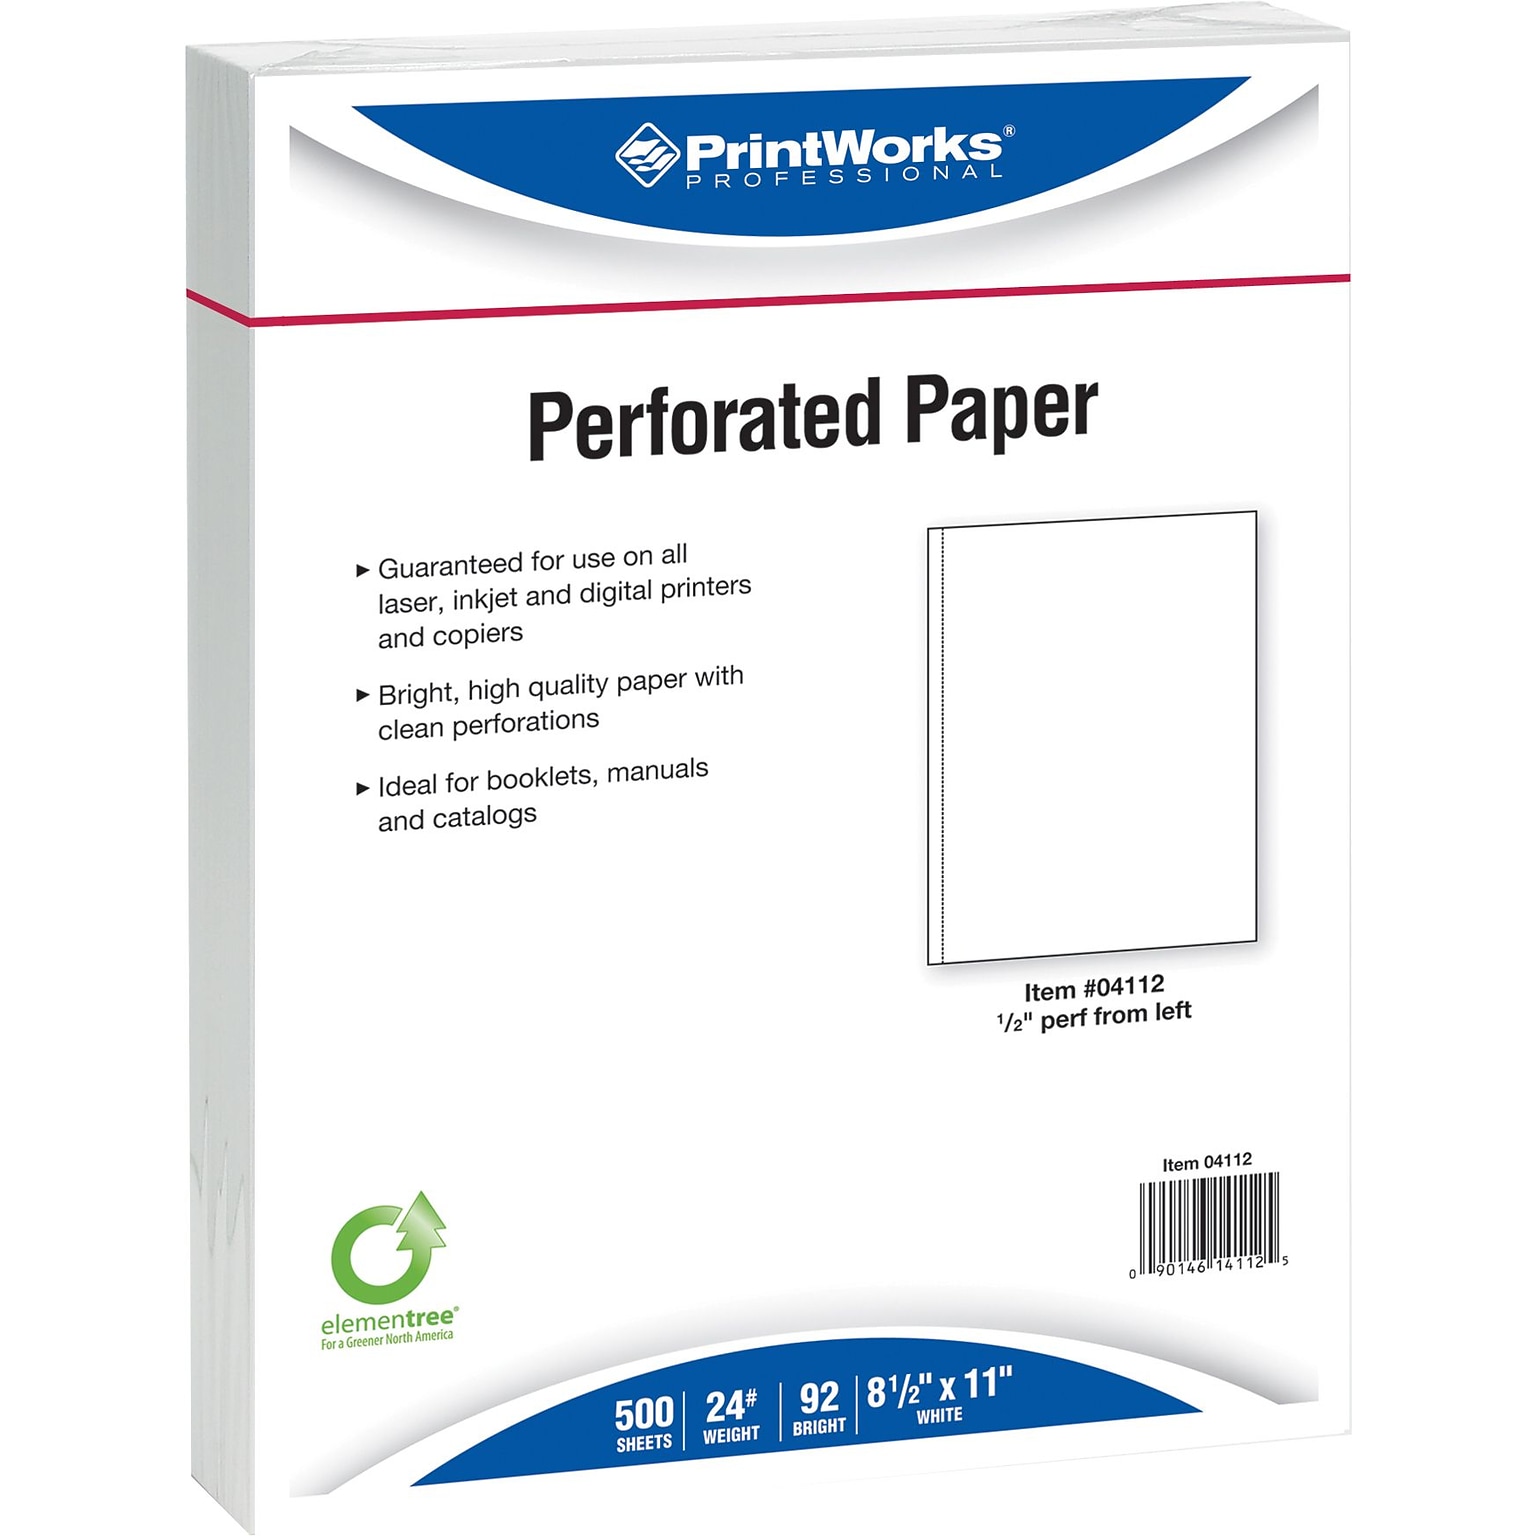 Printworks® Professional 8.5 x 11, Perforated Paper, 24 lbs., 92 Brightness, 2500 Sheets/Carton (04112P)